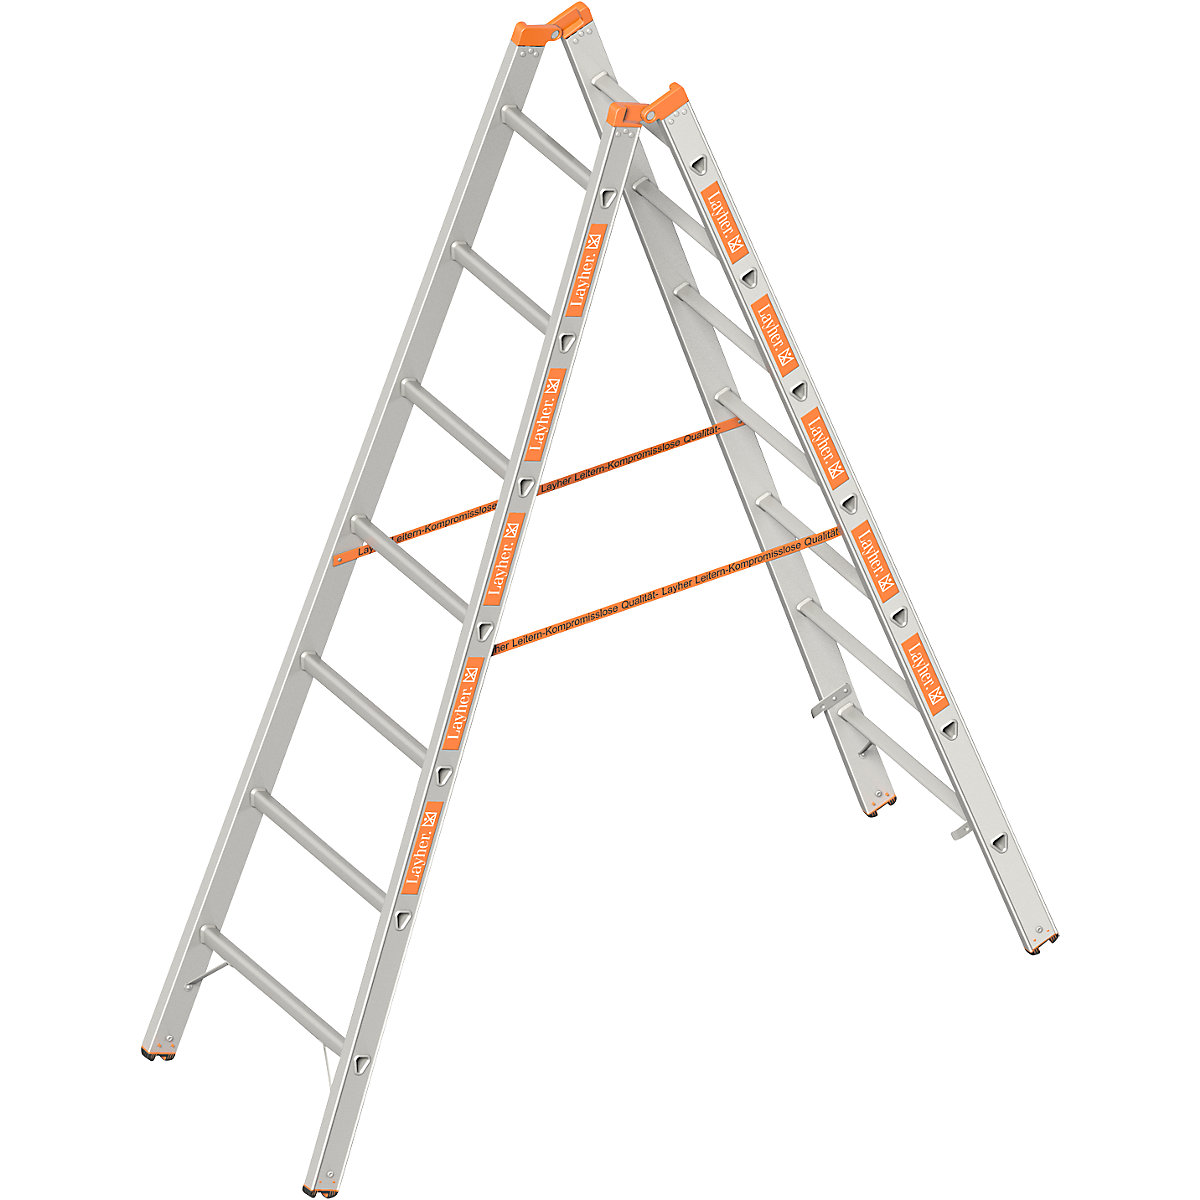 Double sided rung ladder – Layher, double sided access, 2 x 7 rungs-9